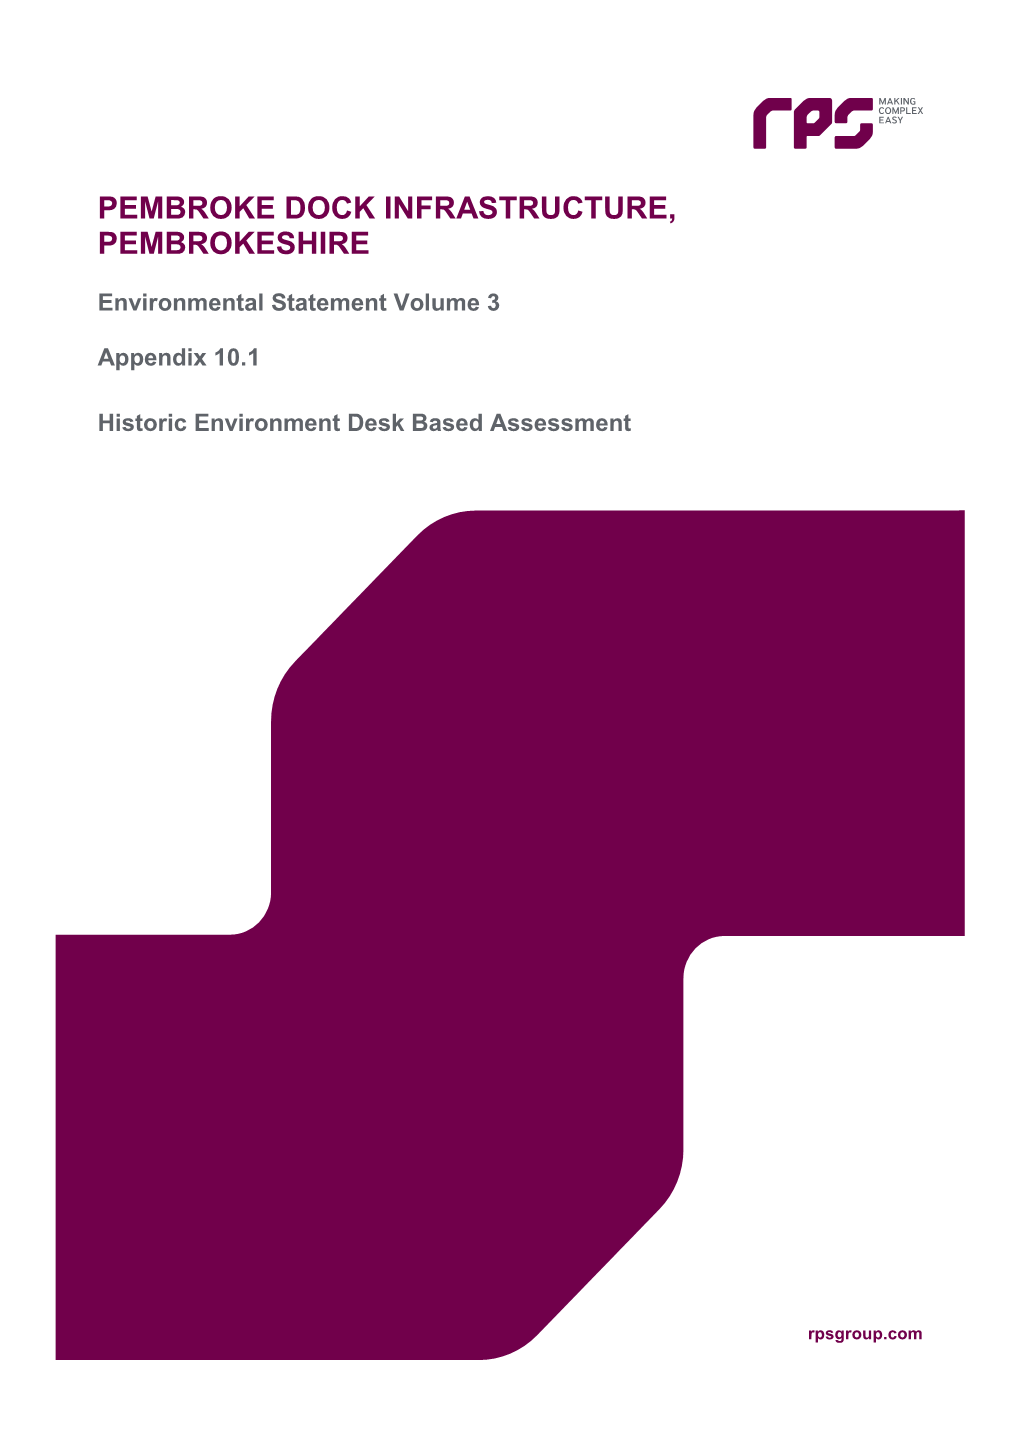 Pembroke Dock Marine, Pembrokeshire: Specification for a Historic Environment Desk-Based Assessment, March 2018